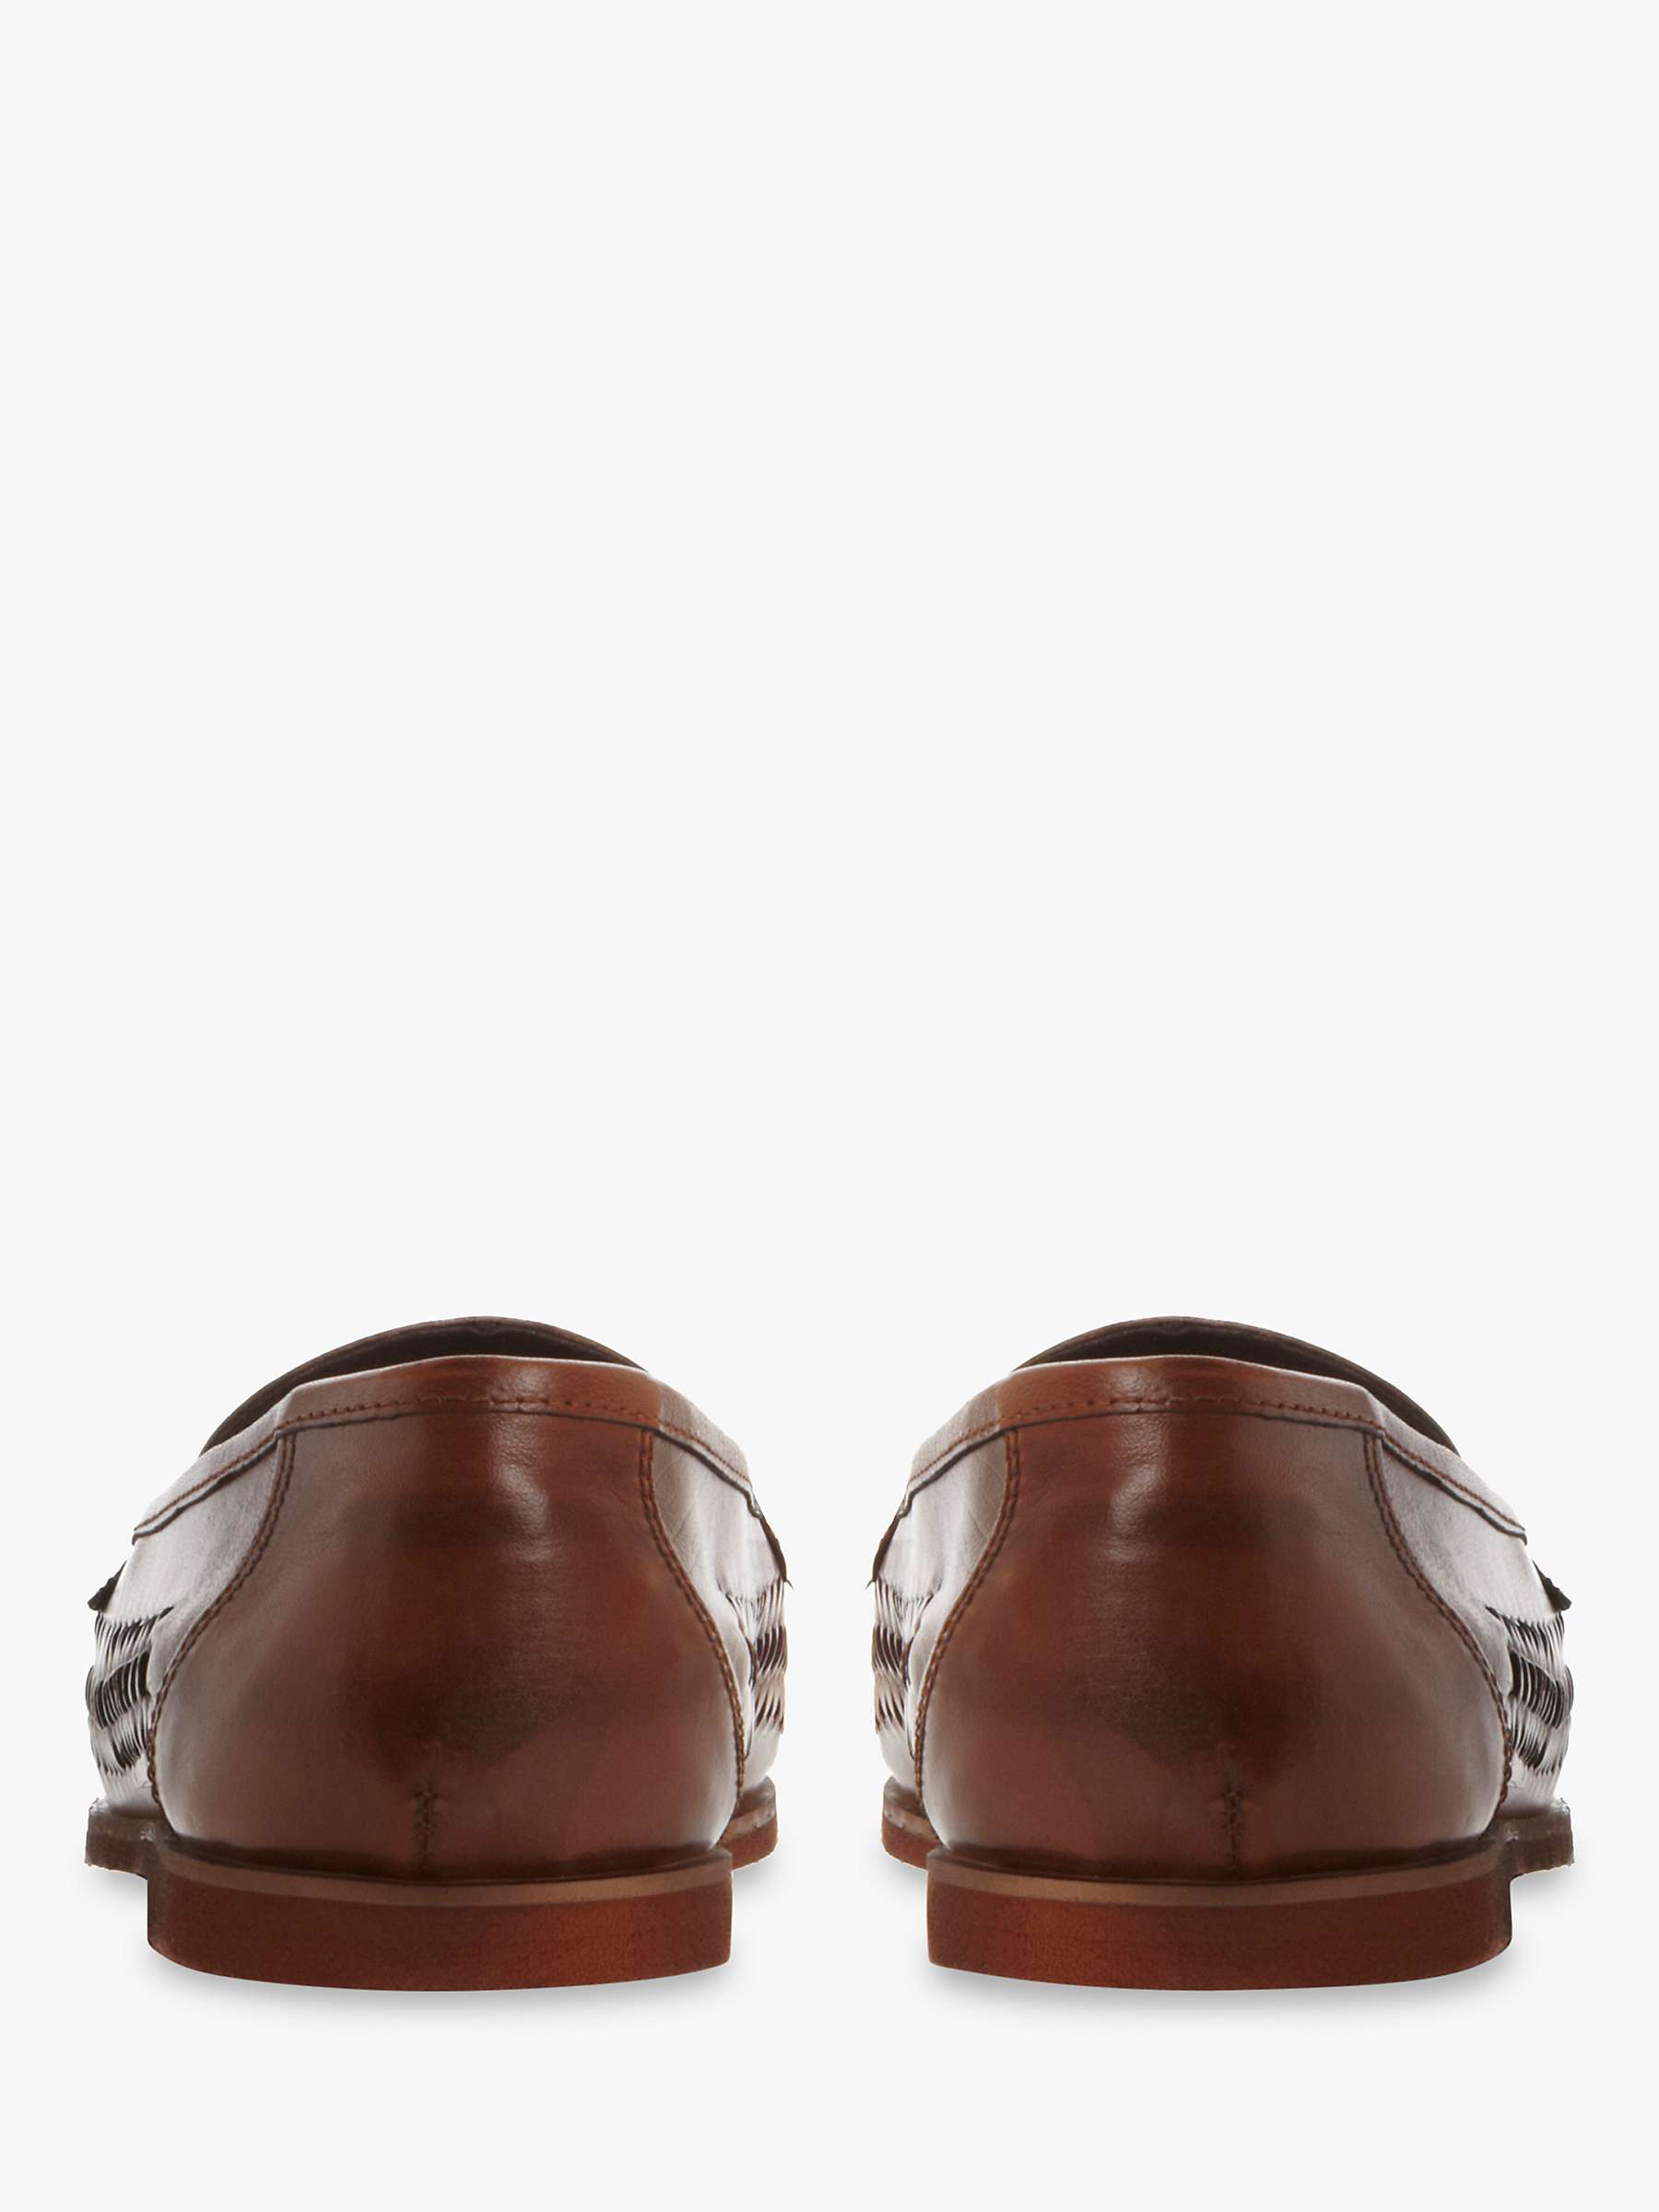 Buy Dune Brighton Rock Woven Leather Loafers Online at johnlewis.com